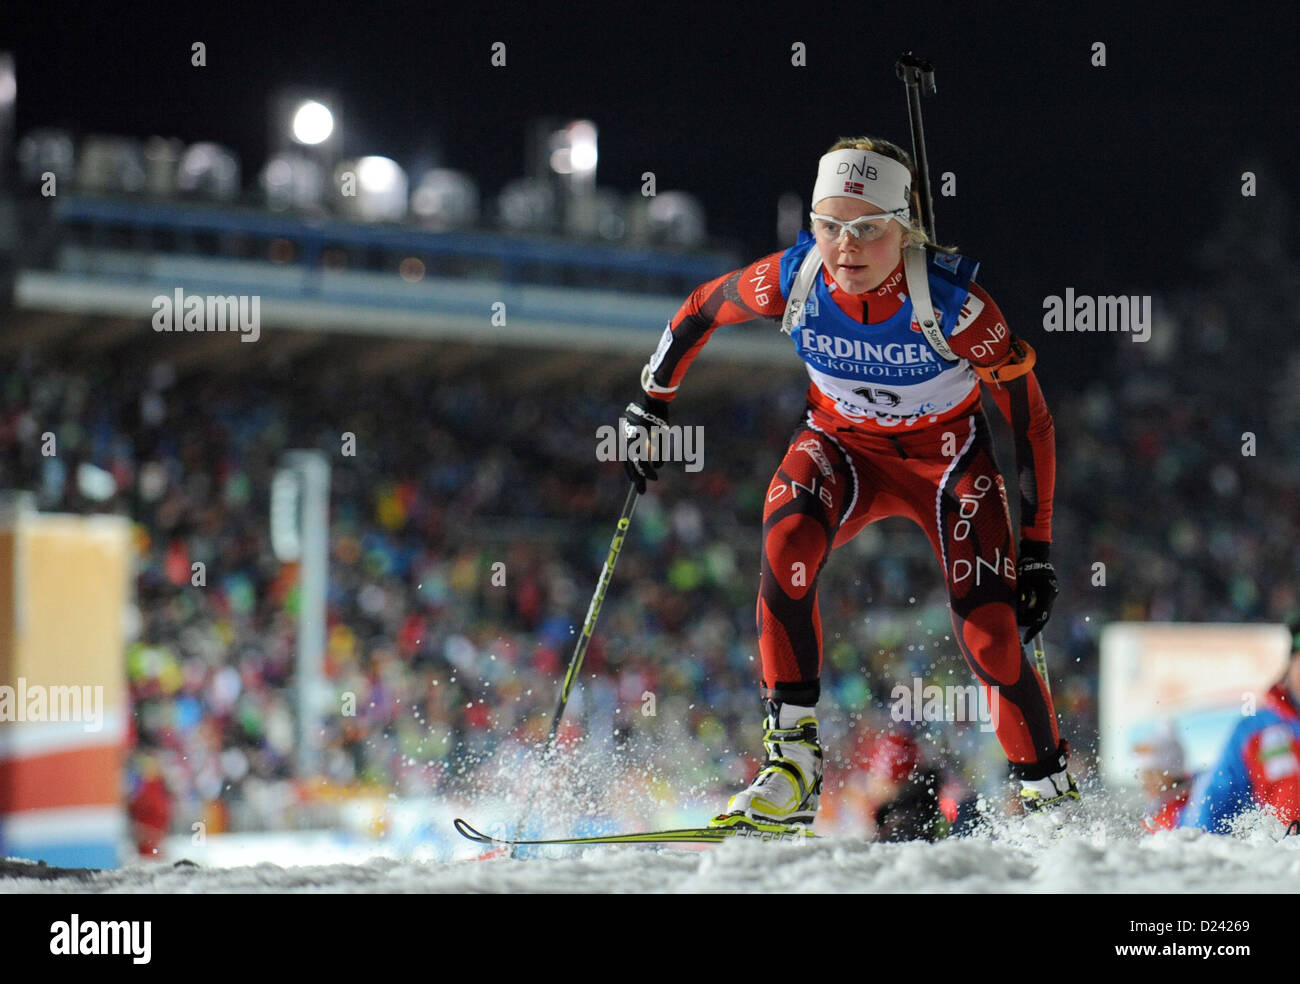 Norwegian biathlete Hilde Fenne skies during the women's sprint World Cup race at Chiemgau Arena in Ruhpolding, Germany, 11 January 2013. Photo: Andreas Gebert Stock Photo